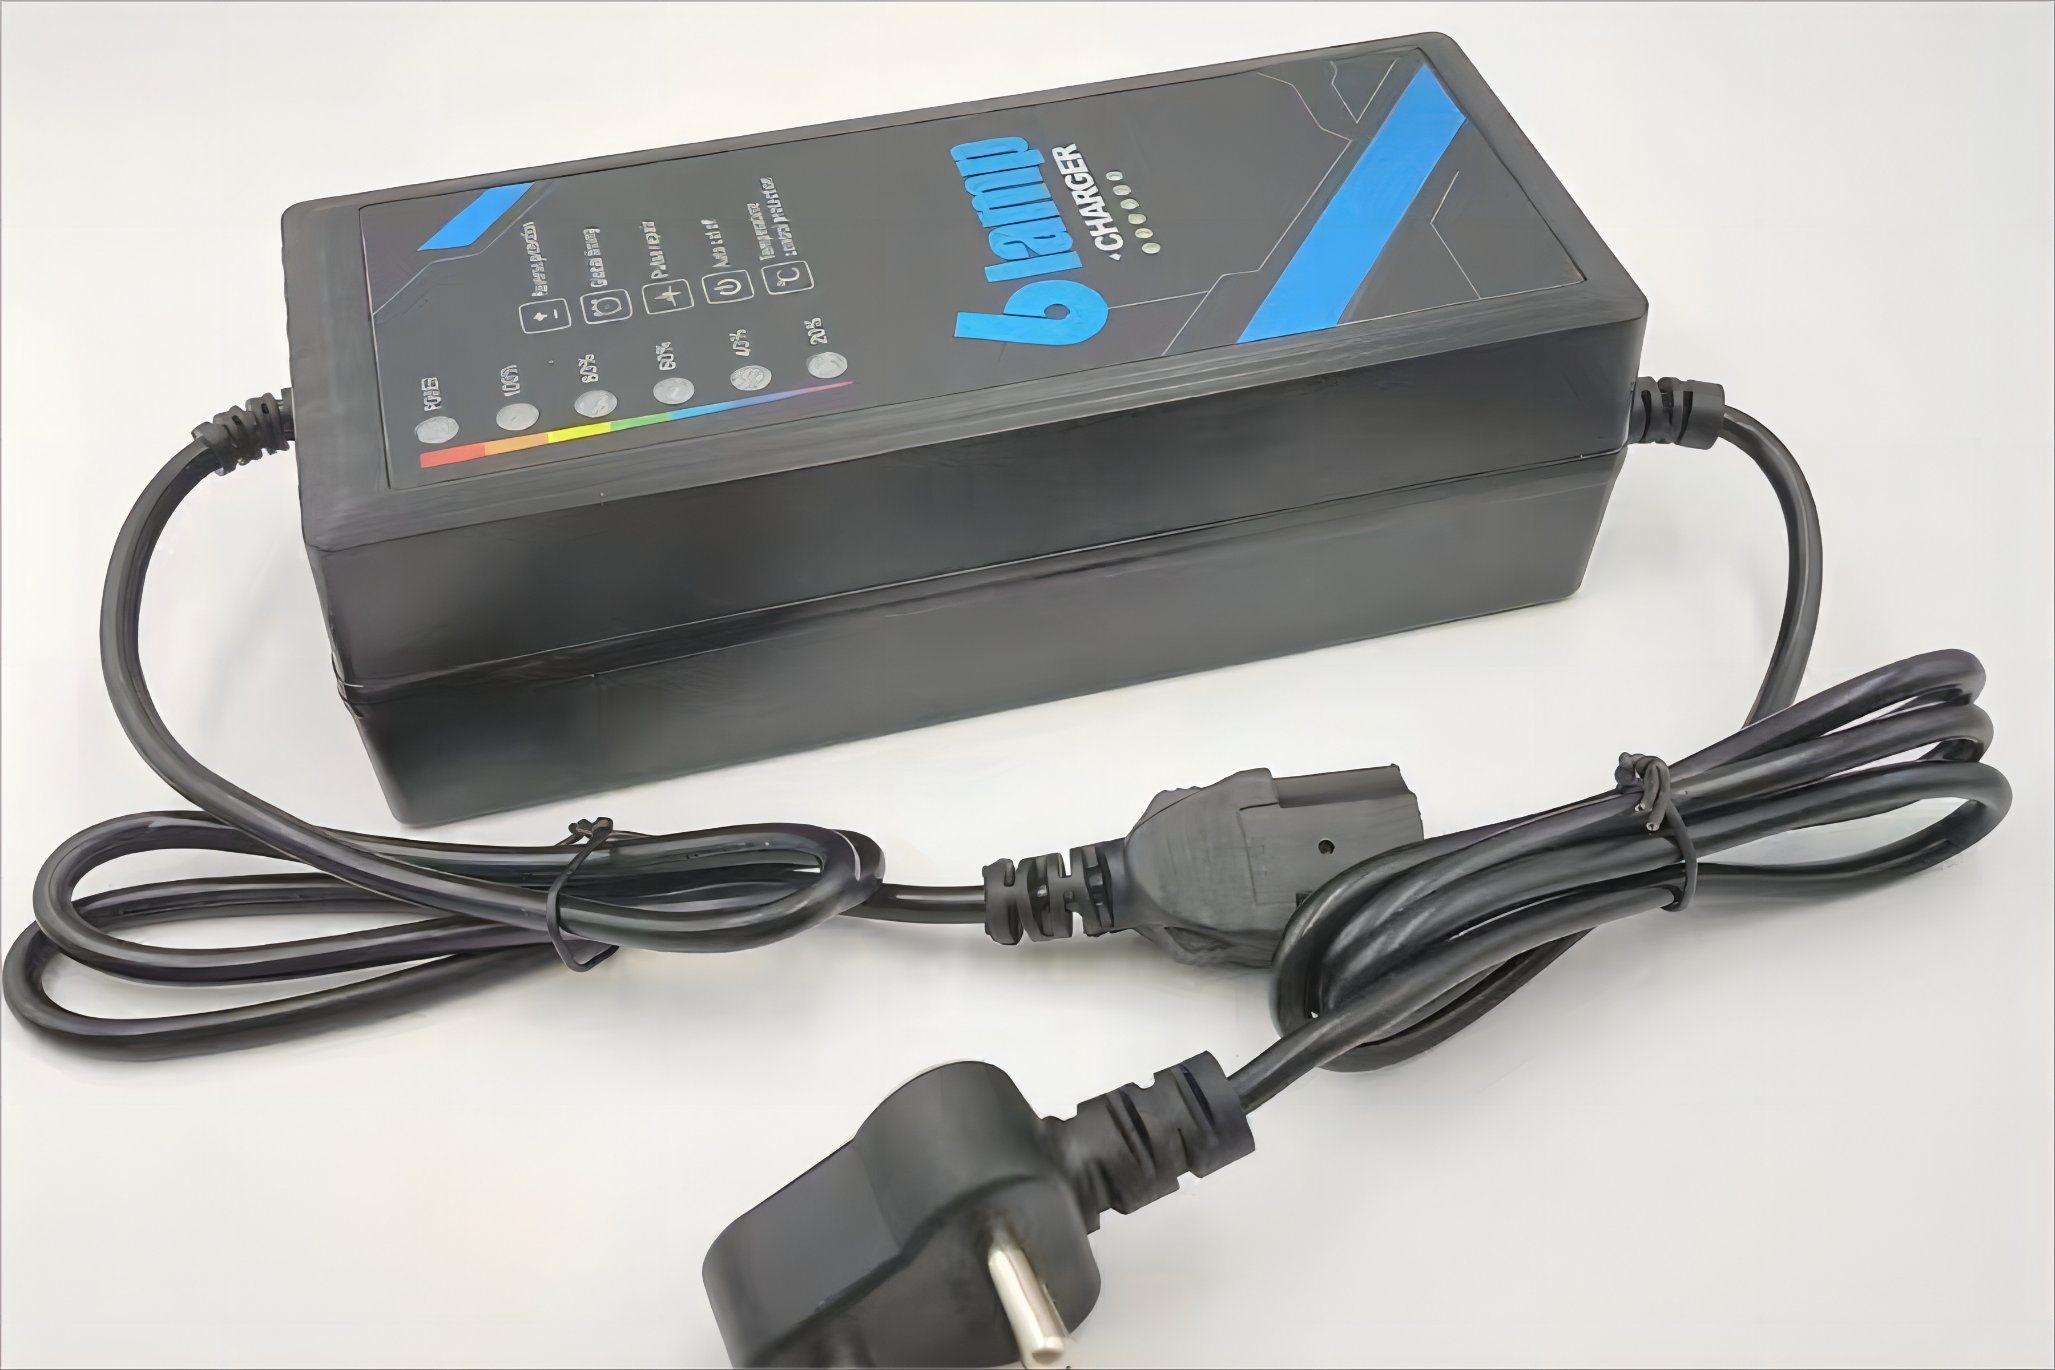 LITHIUM  BETTERY CHARGER  / LEAD ACID BATTERY CHARGER